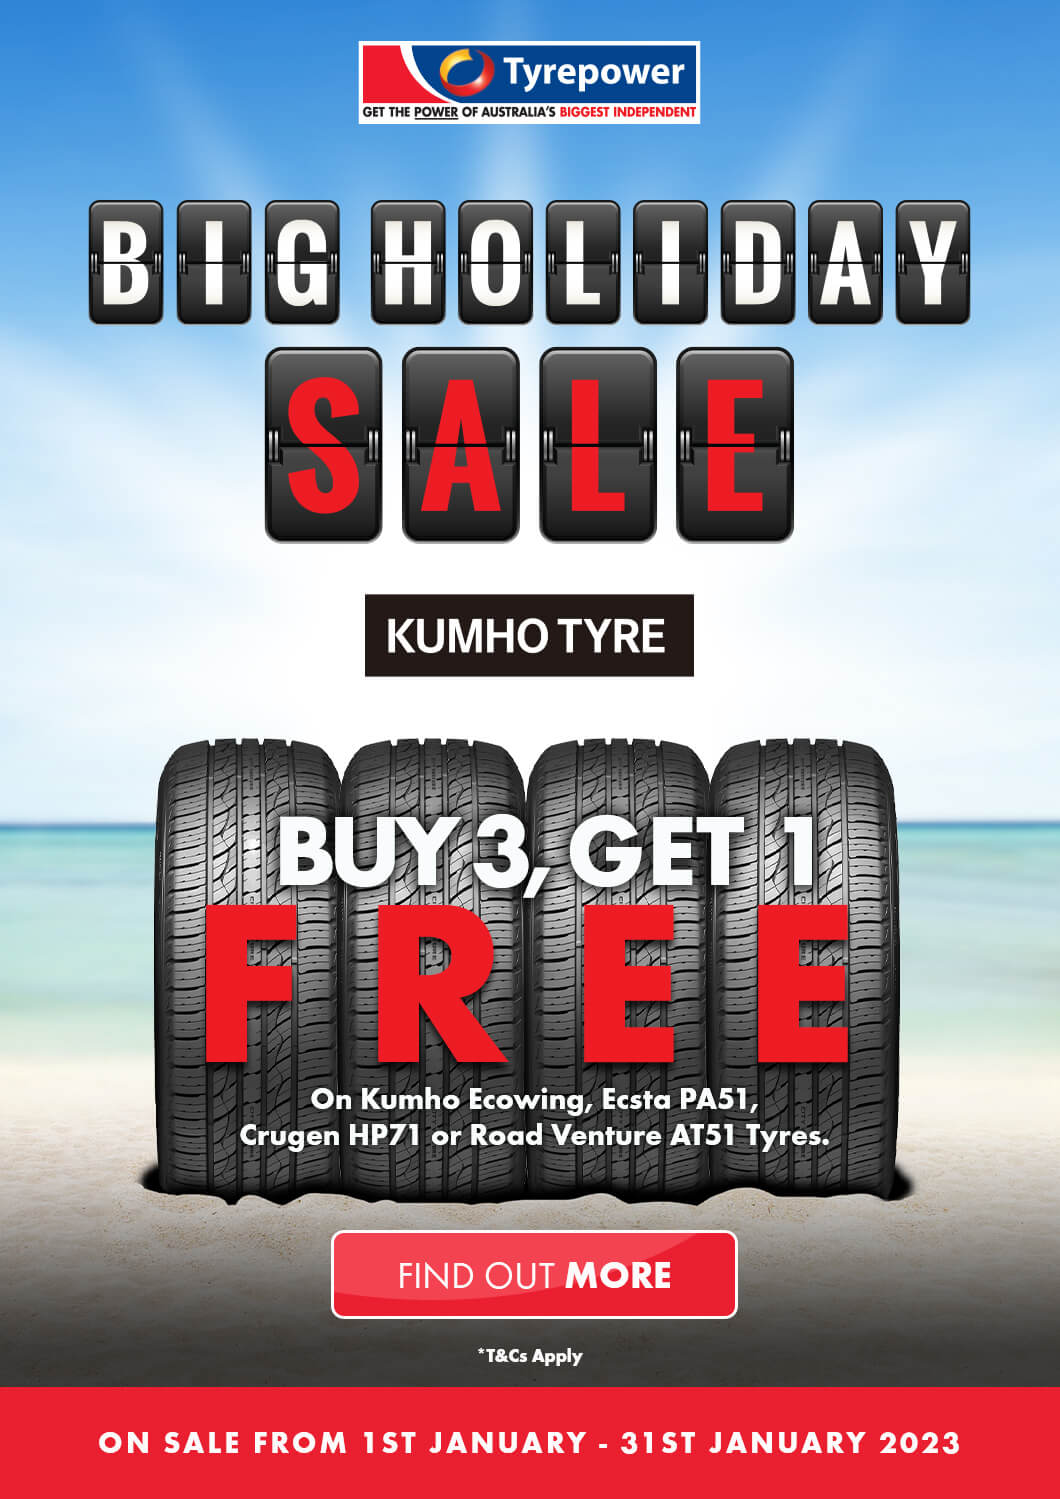 Buy 3 Get 1 Free on Kumho Ecowing, Ecsta PA51, Crugen HP71 or Road Venture AT51 Tyres.